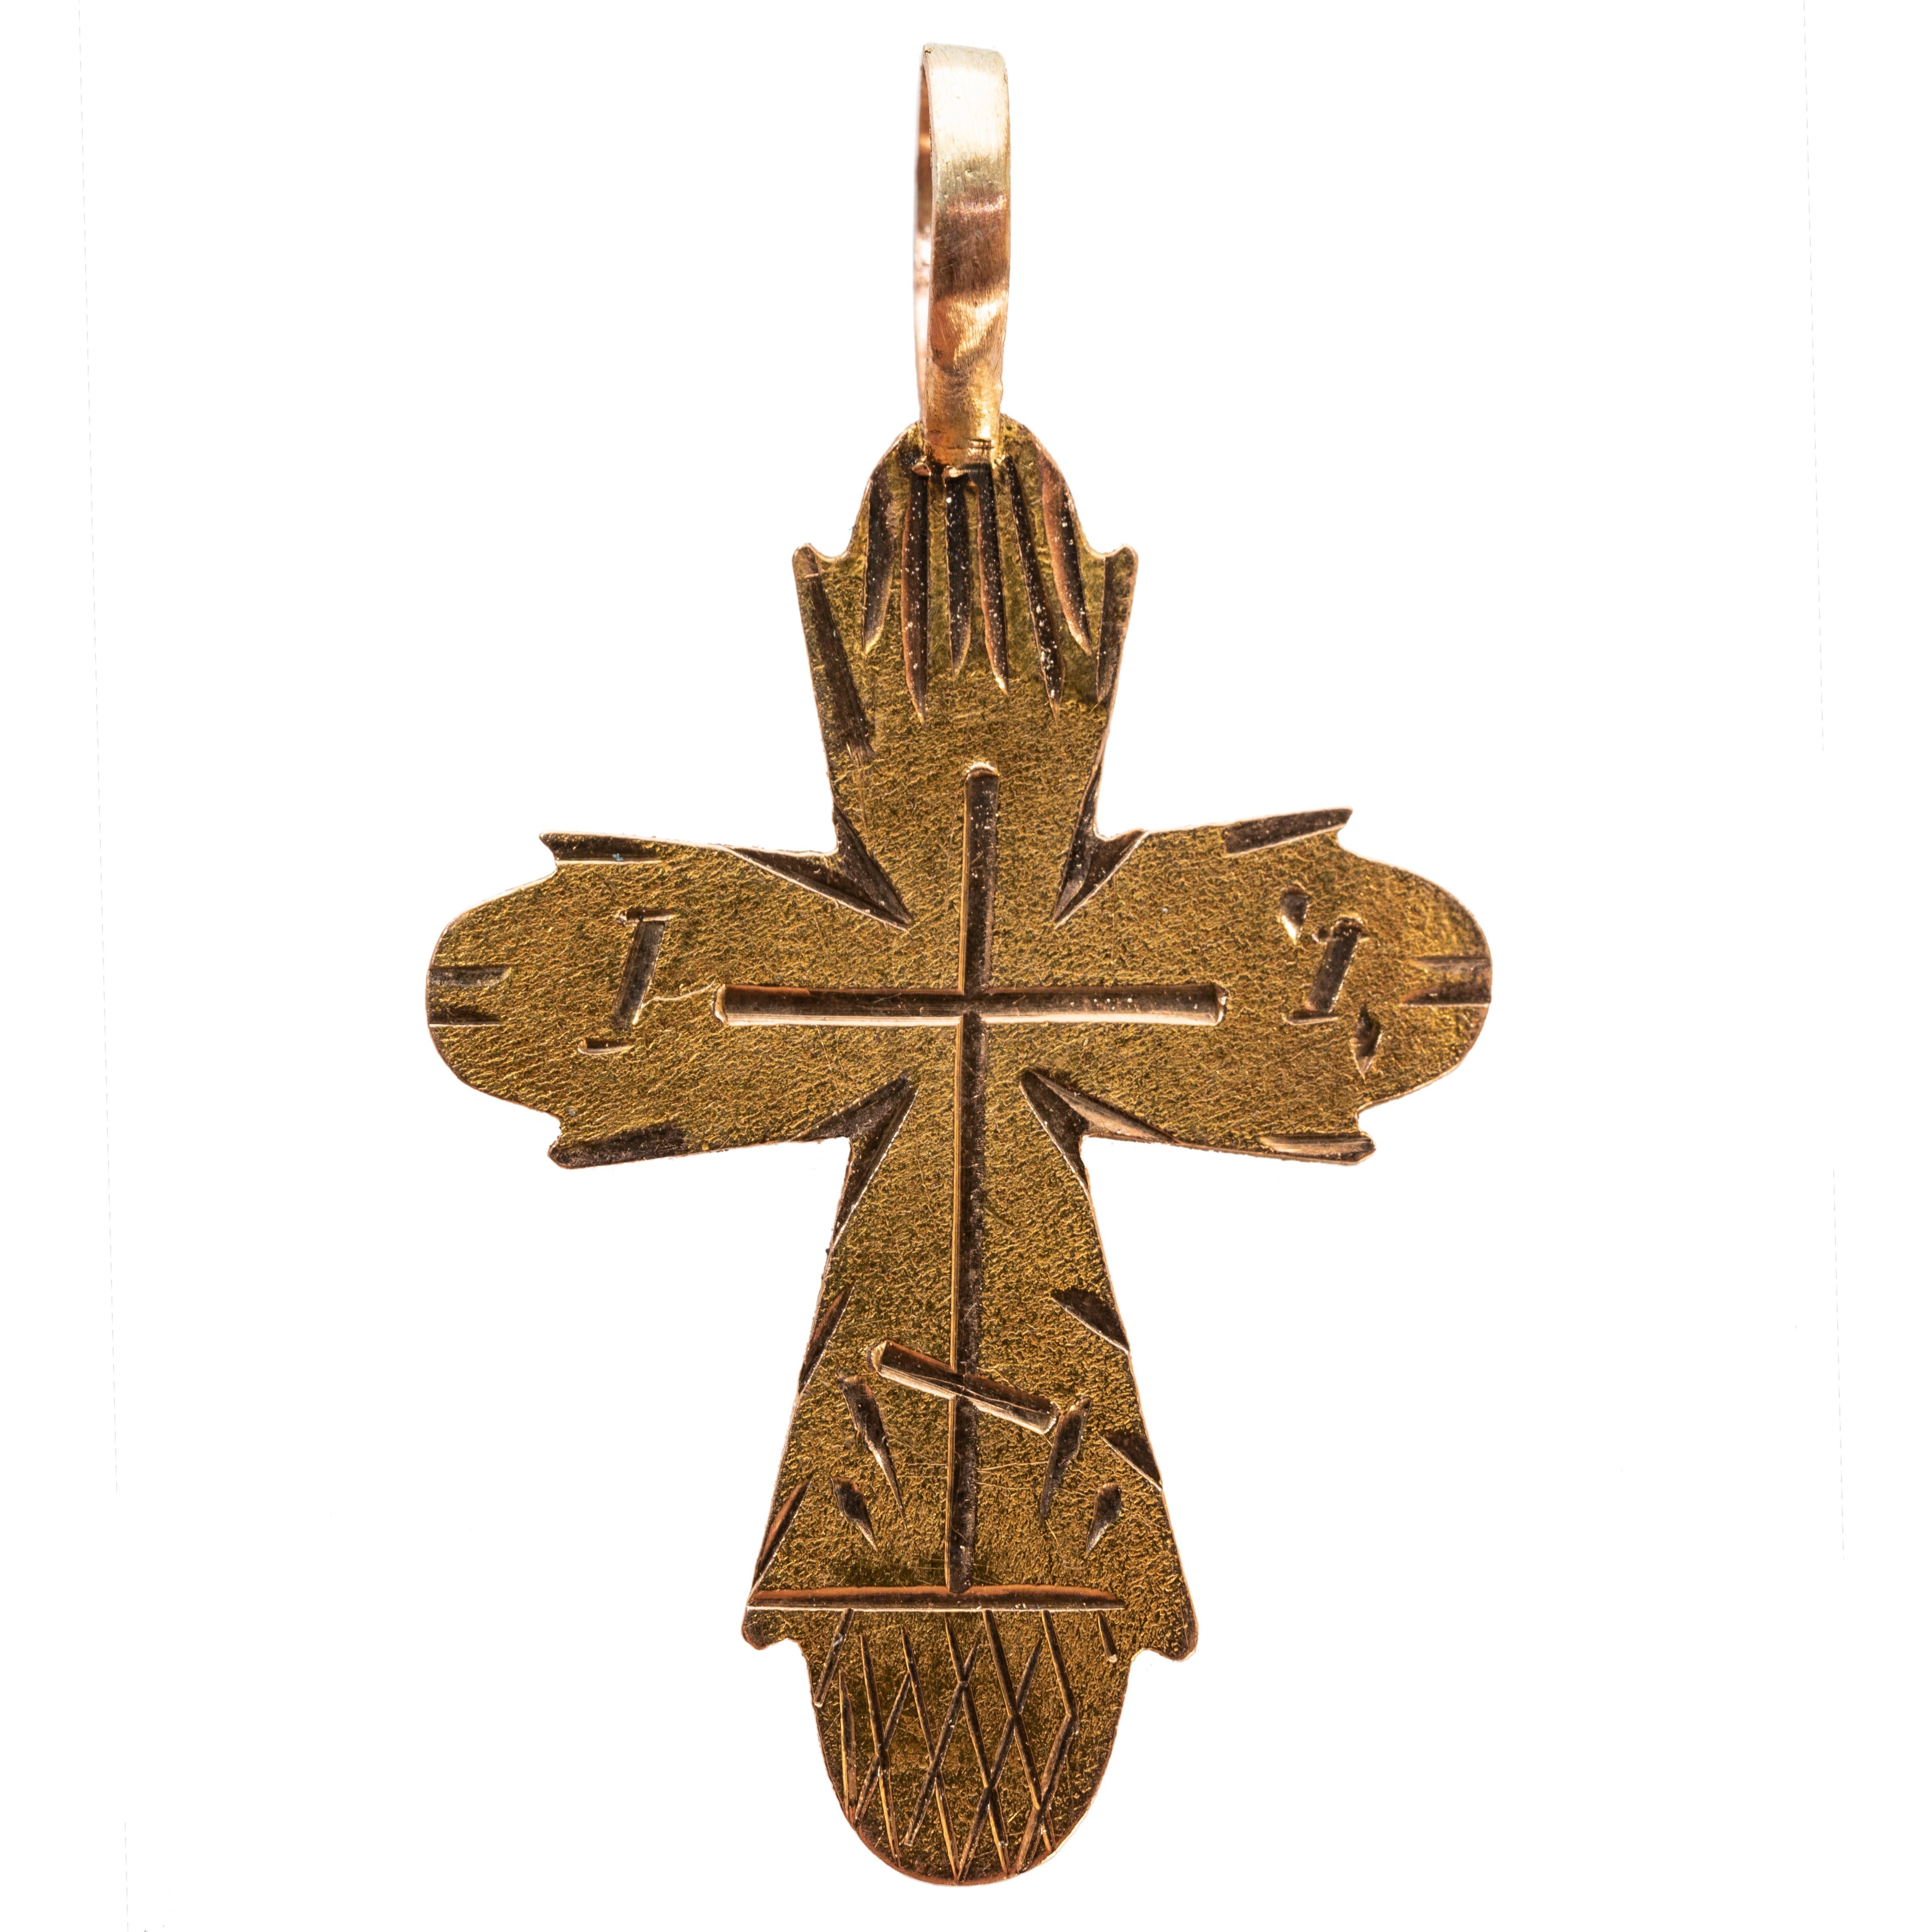 From the Romanov era, period of Tsar Nicholas II, a gold cross from the ancient capital of Moscow, the front engraved with a central cross.

1899-1908, with Russian maker’s mark. 

1 1/8 x 3/4 in  (2.9 x 1.9 cm.) (l x w)
